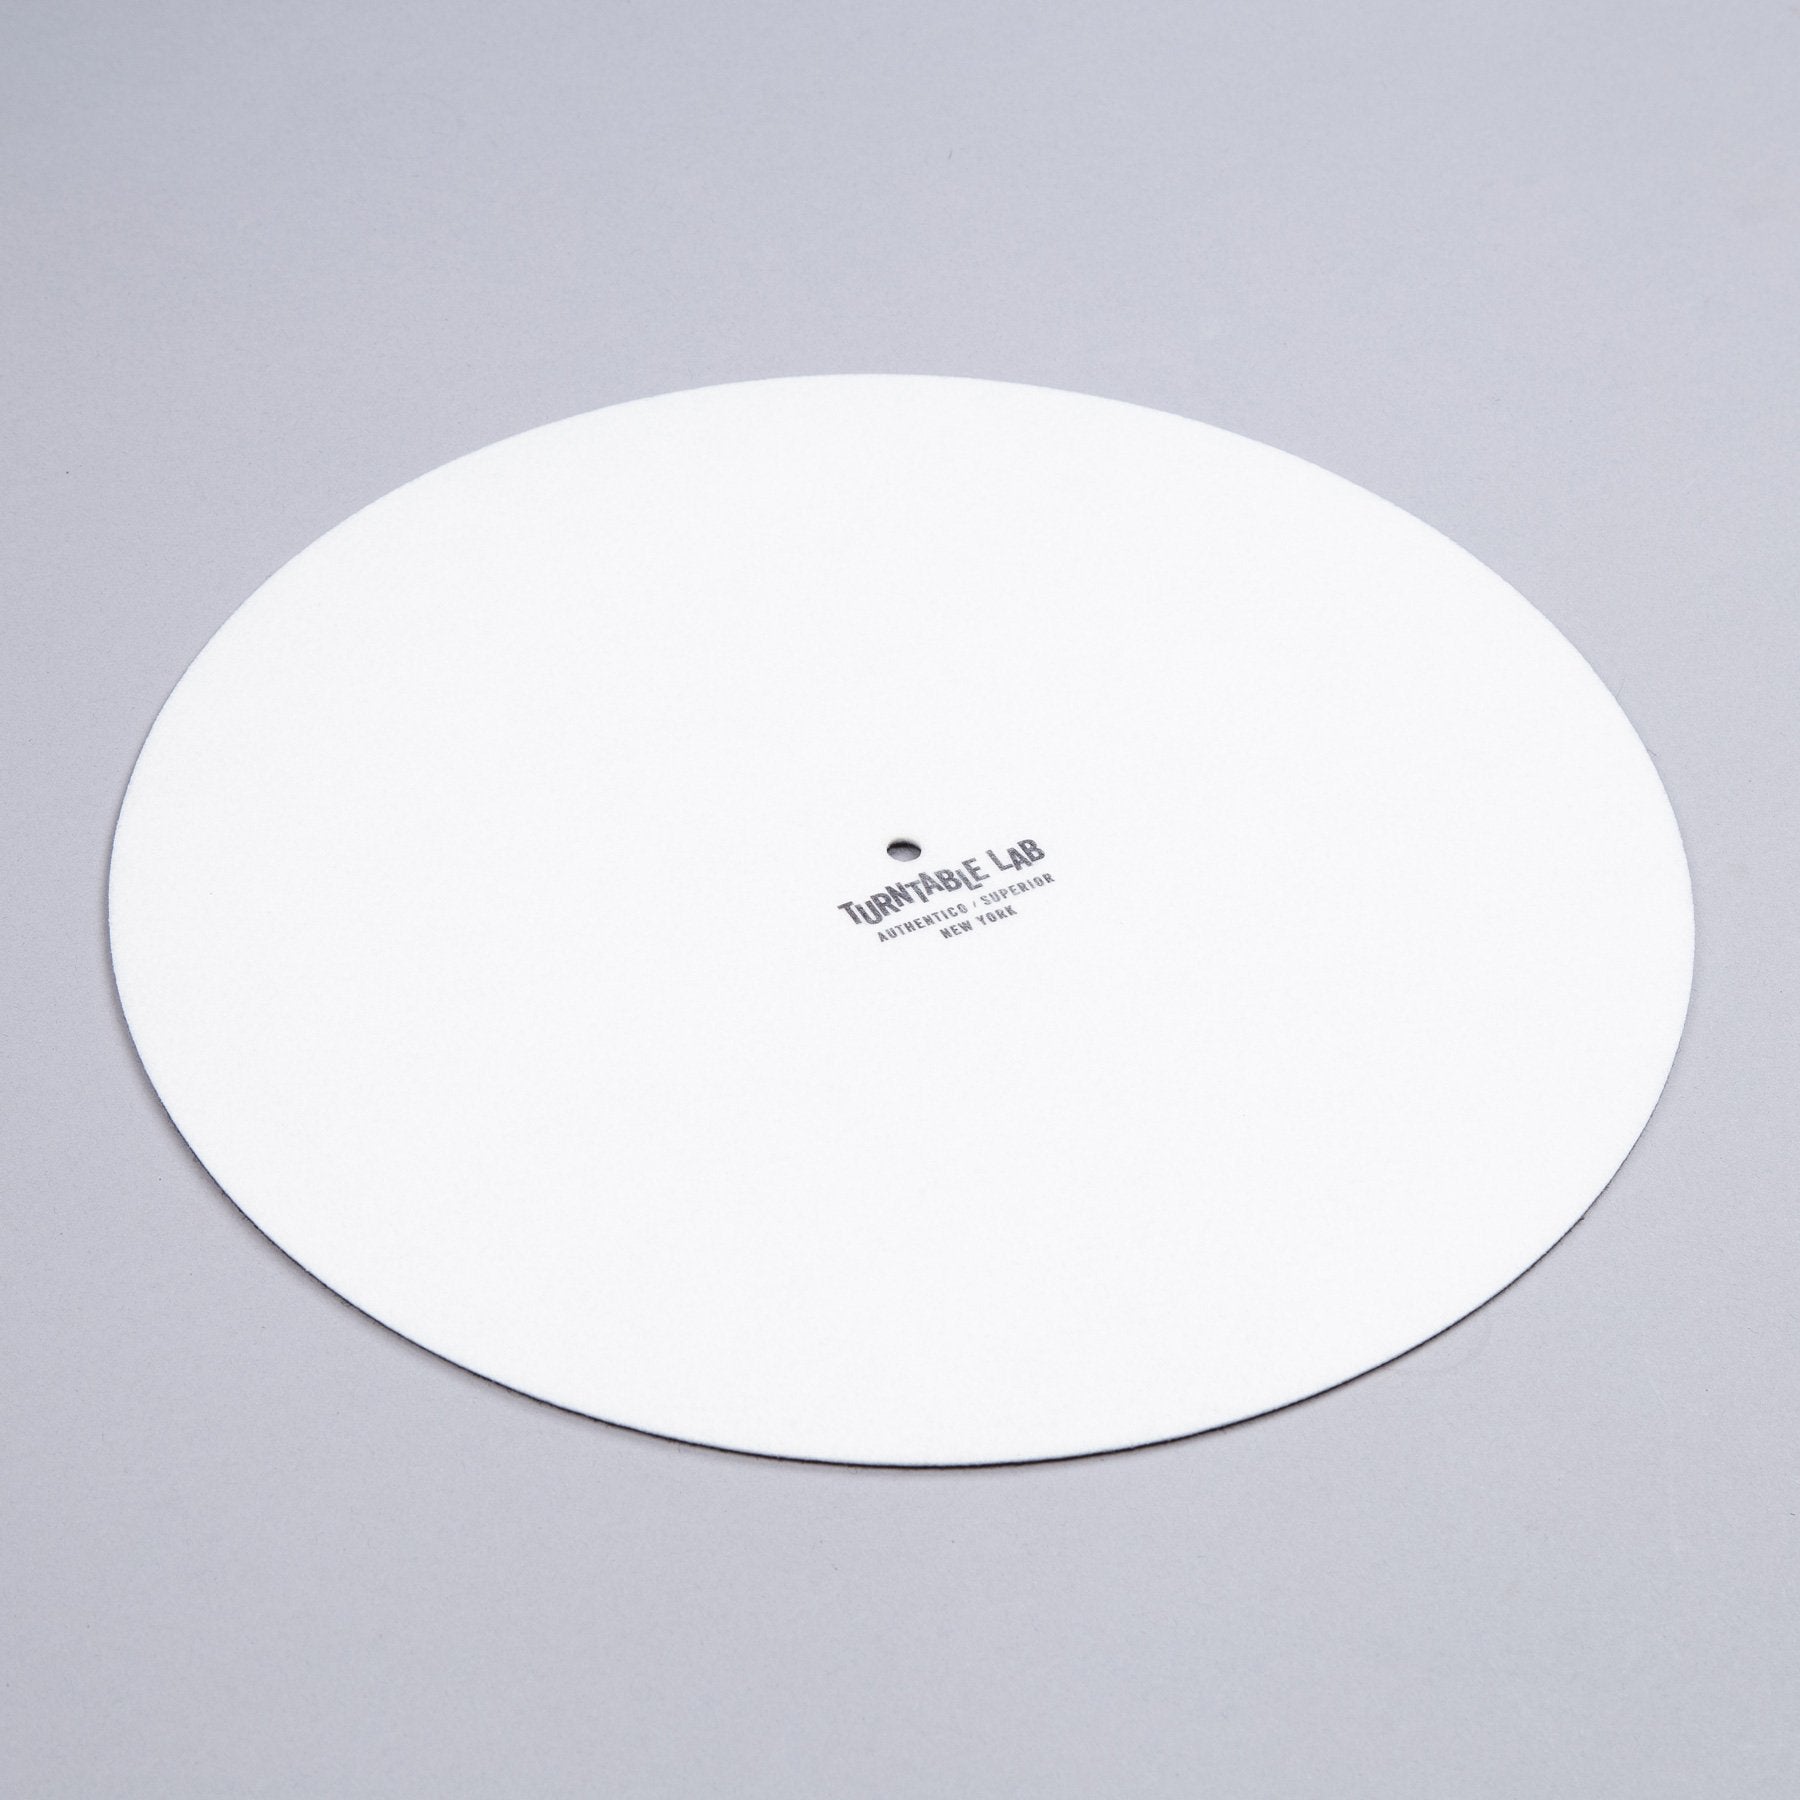 Turntable Lab: Supersoft Record Slipmat Record Mats